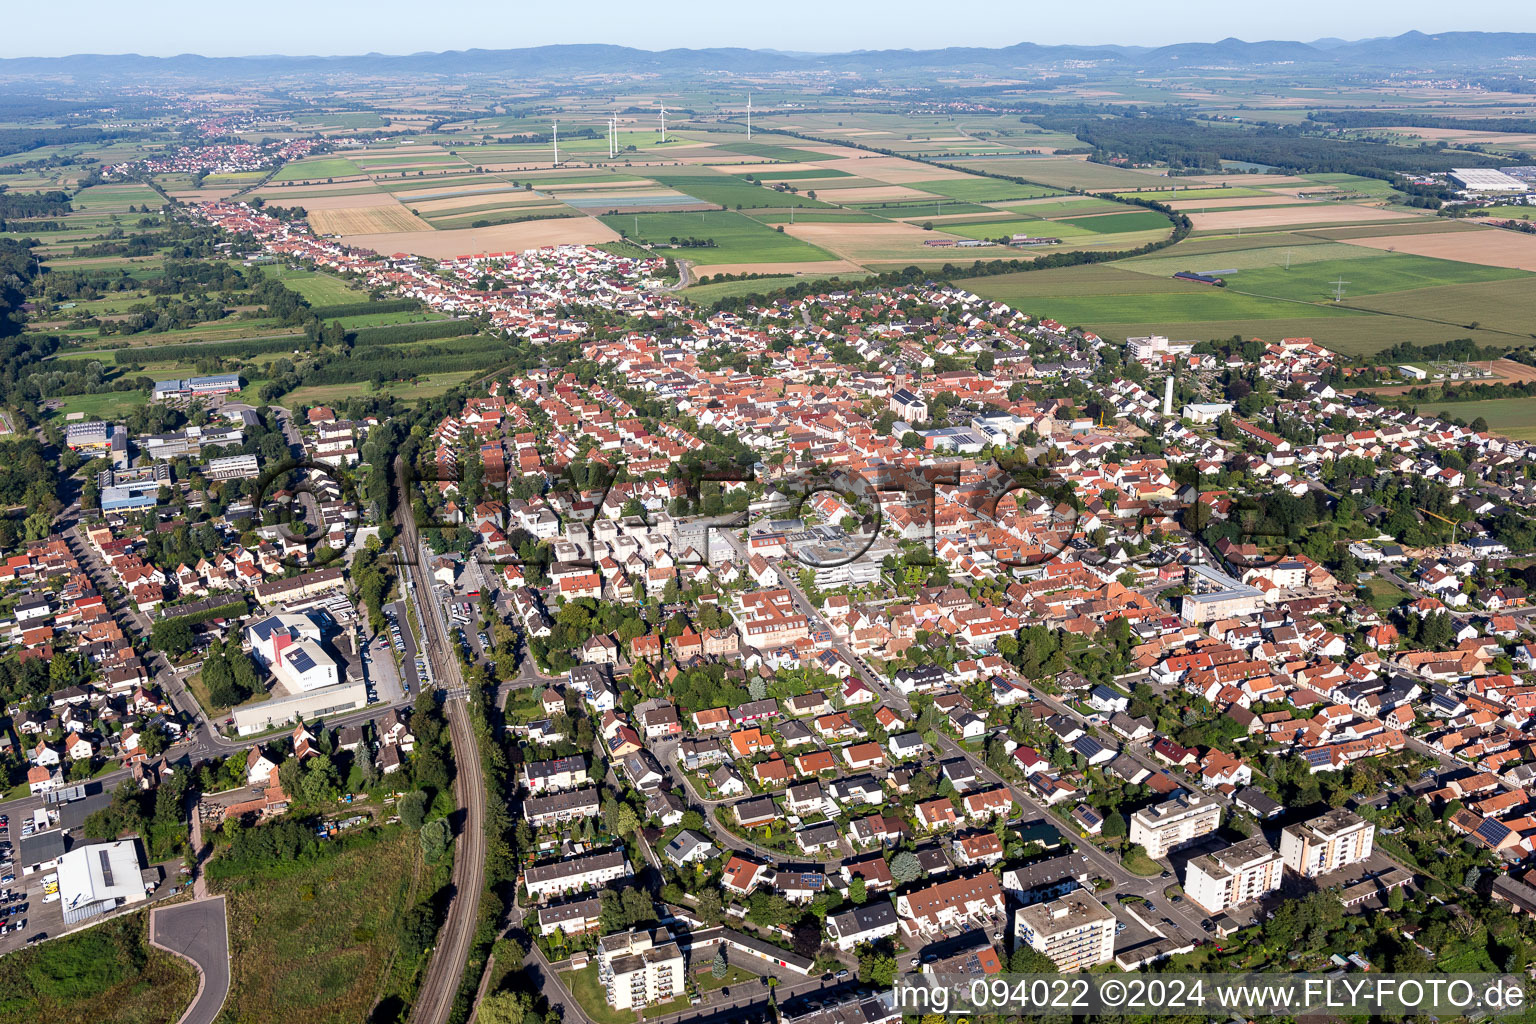 Aerial photograpy of Town View of the streets and houses of the residential areas in Kandel in the state Rhineland-Palatinate, Germany